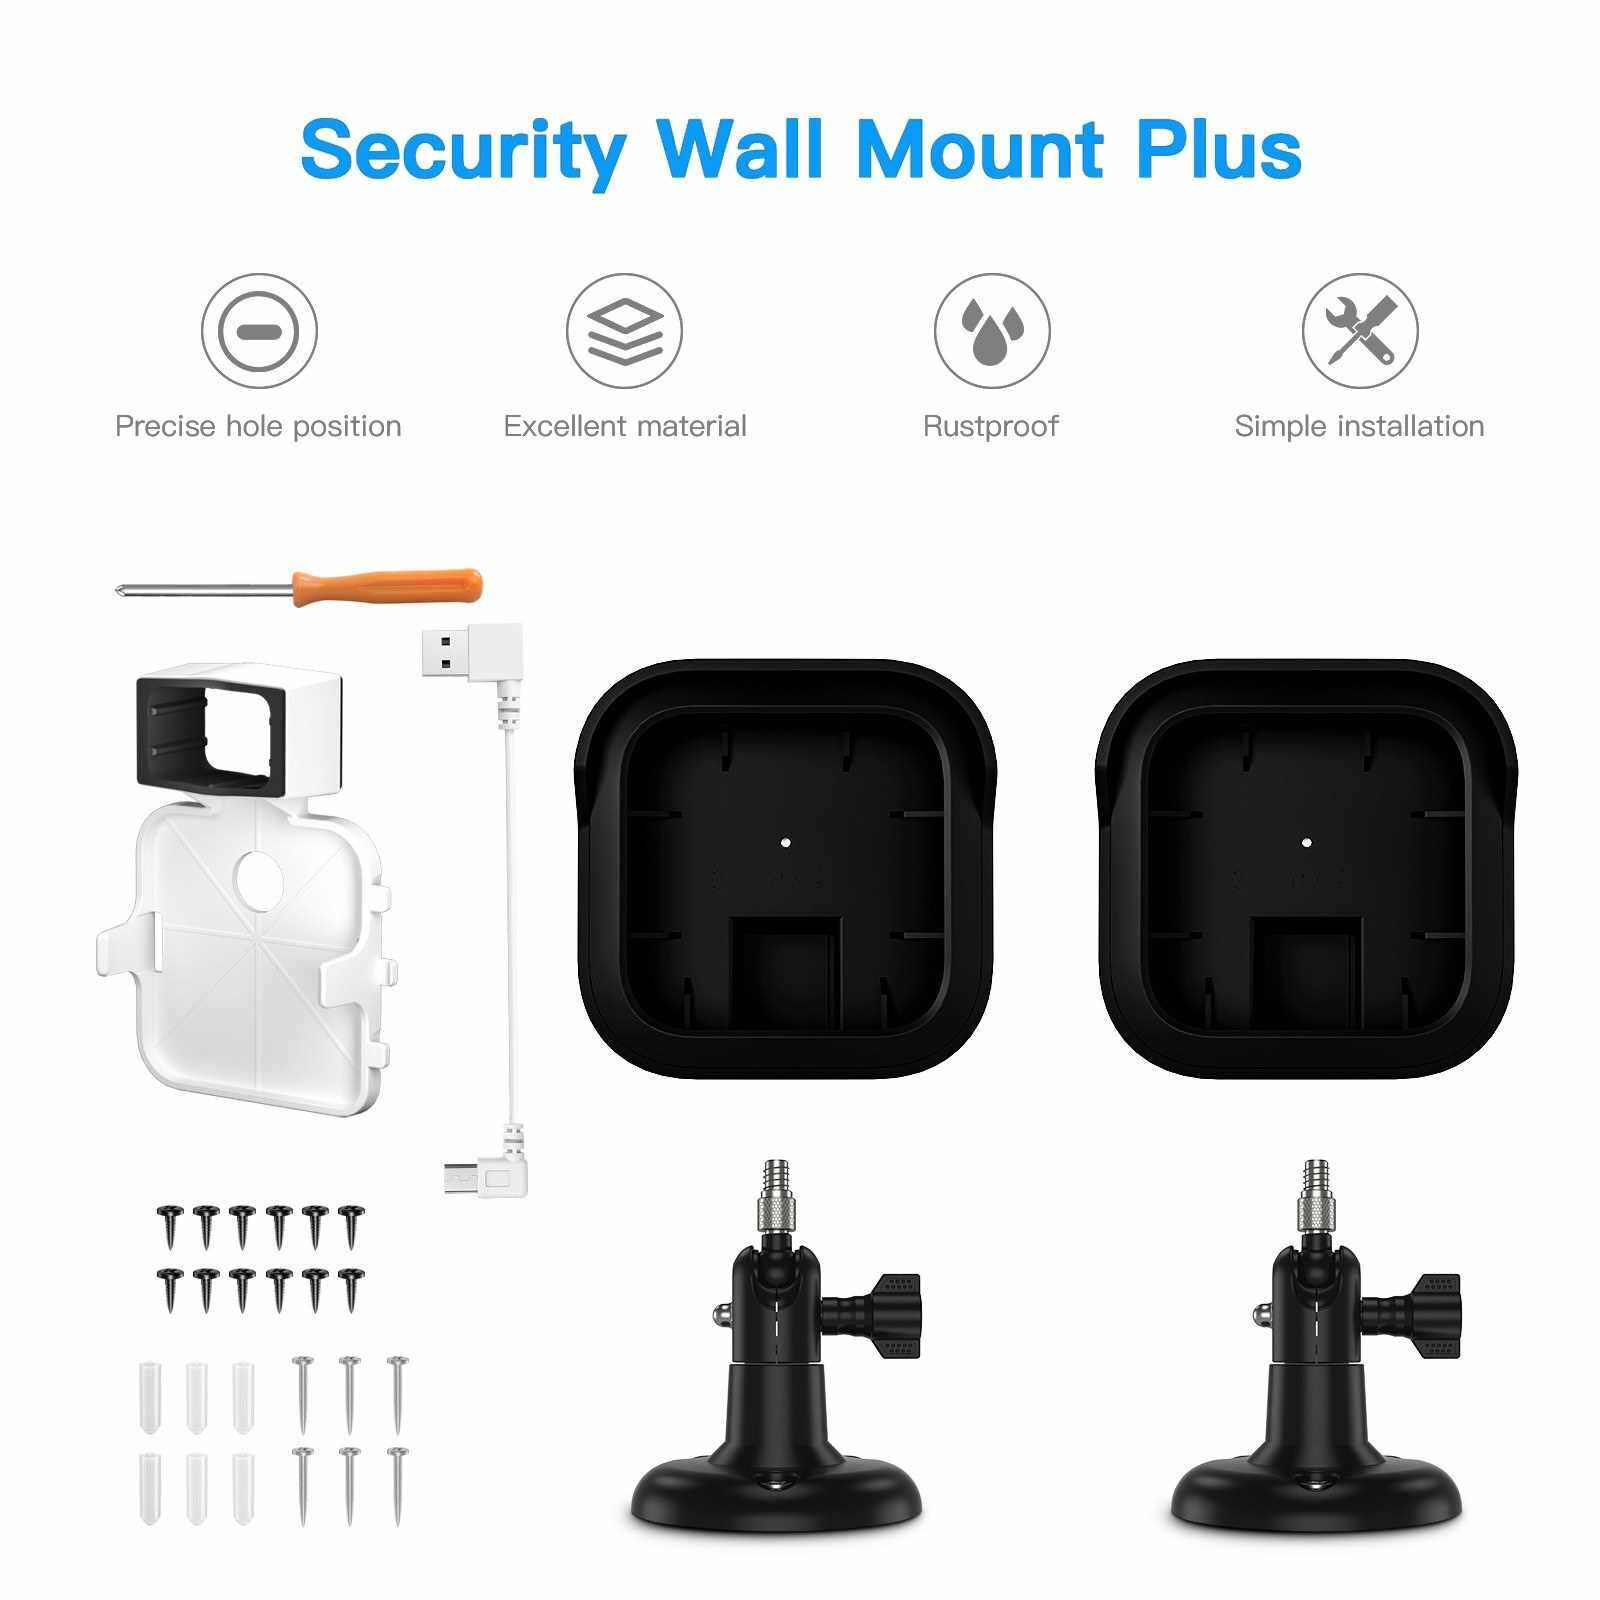 2pcs DF1079+1021+DF1005 Outdoor Security Wall Mount Plus Weatherproof Protective Cover and 360 Degree Adjustable Mount Lock for Blink All-new Blink Outdoor Camera Anti-theft Bracket Set (Black)